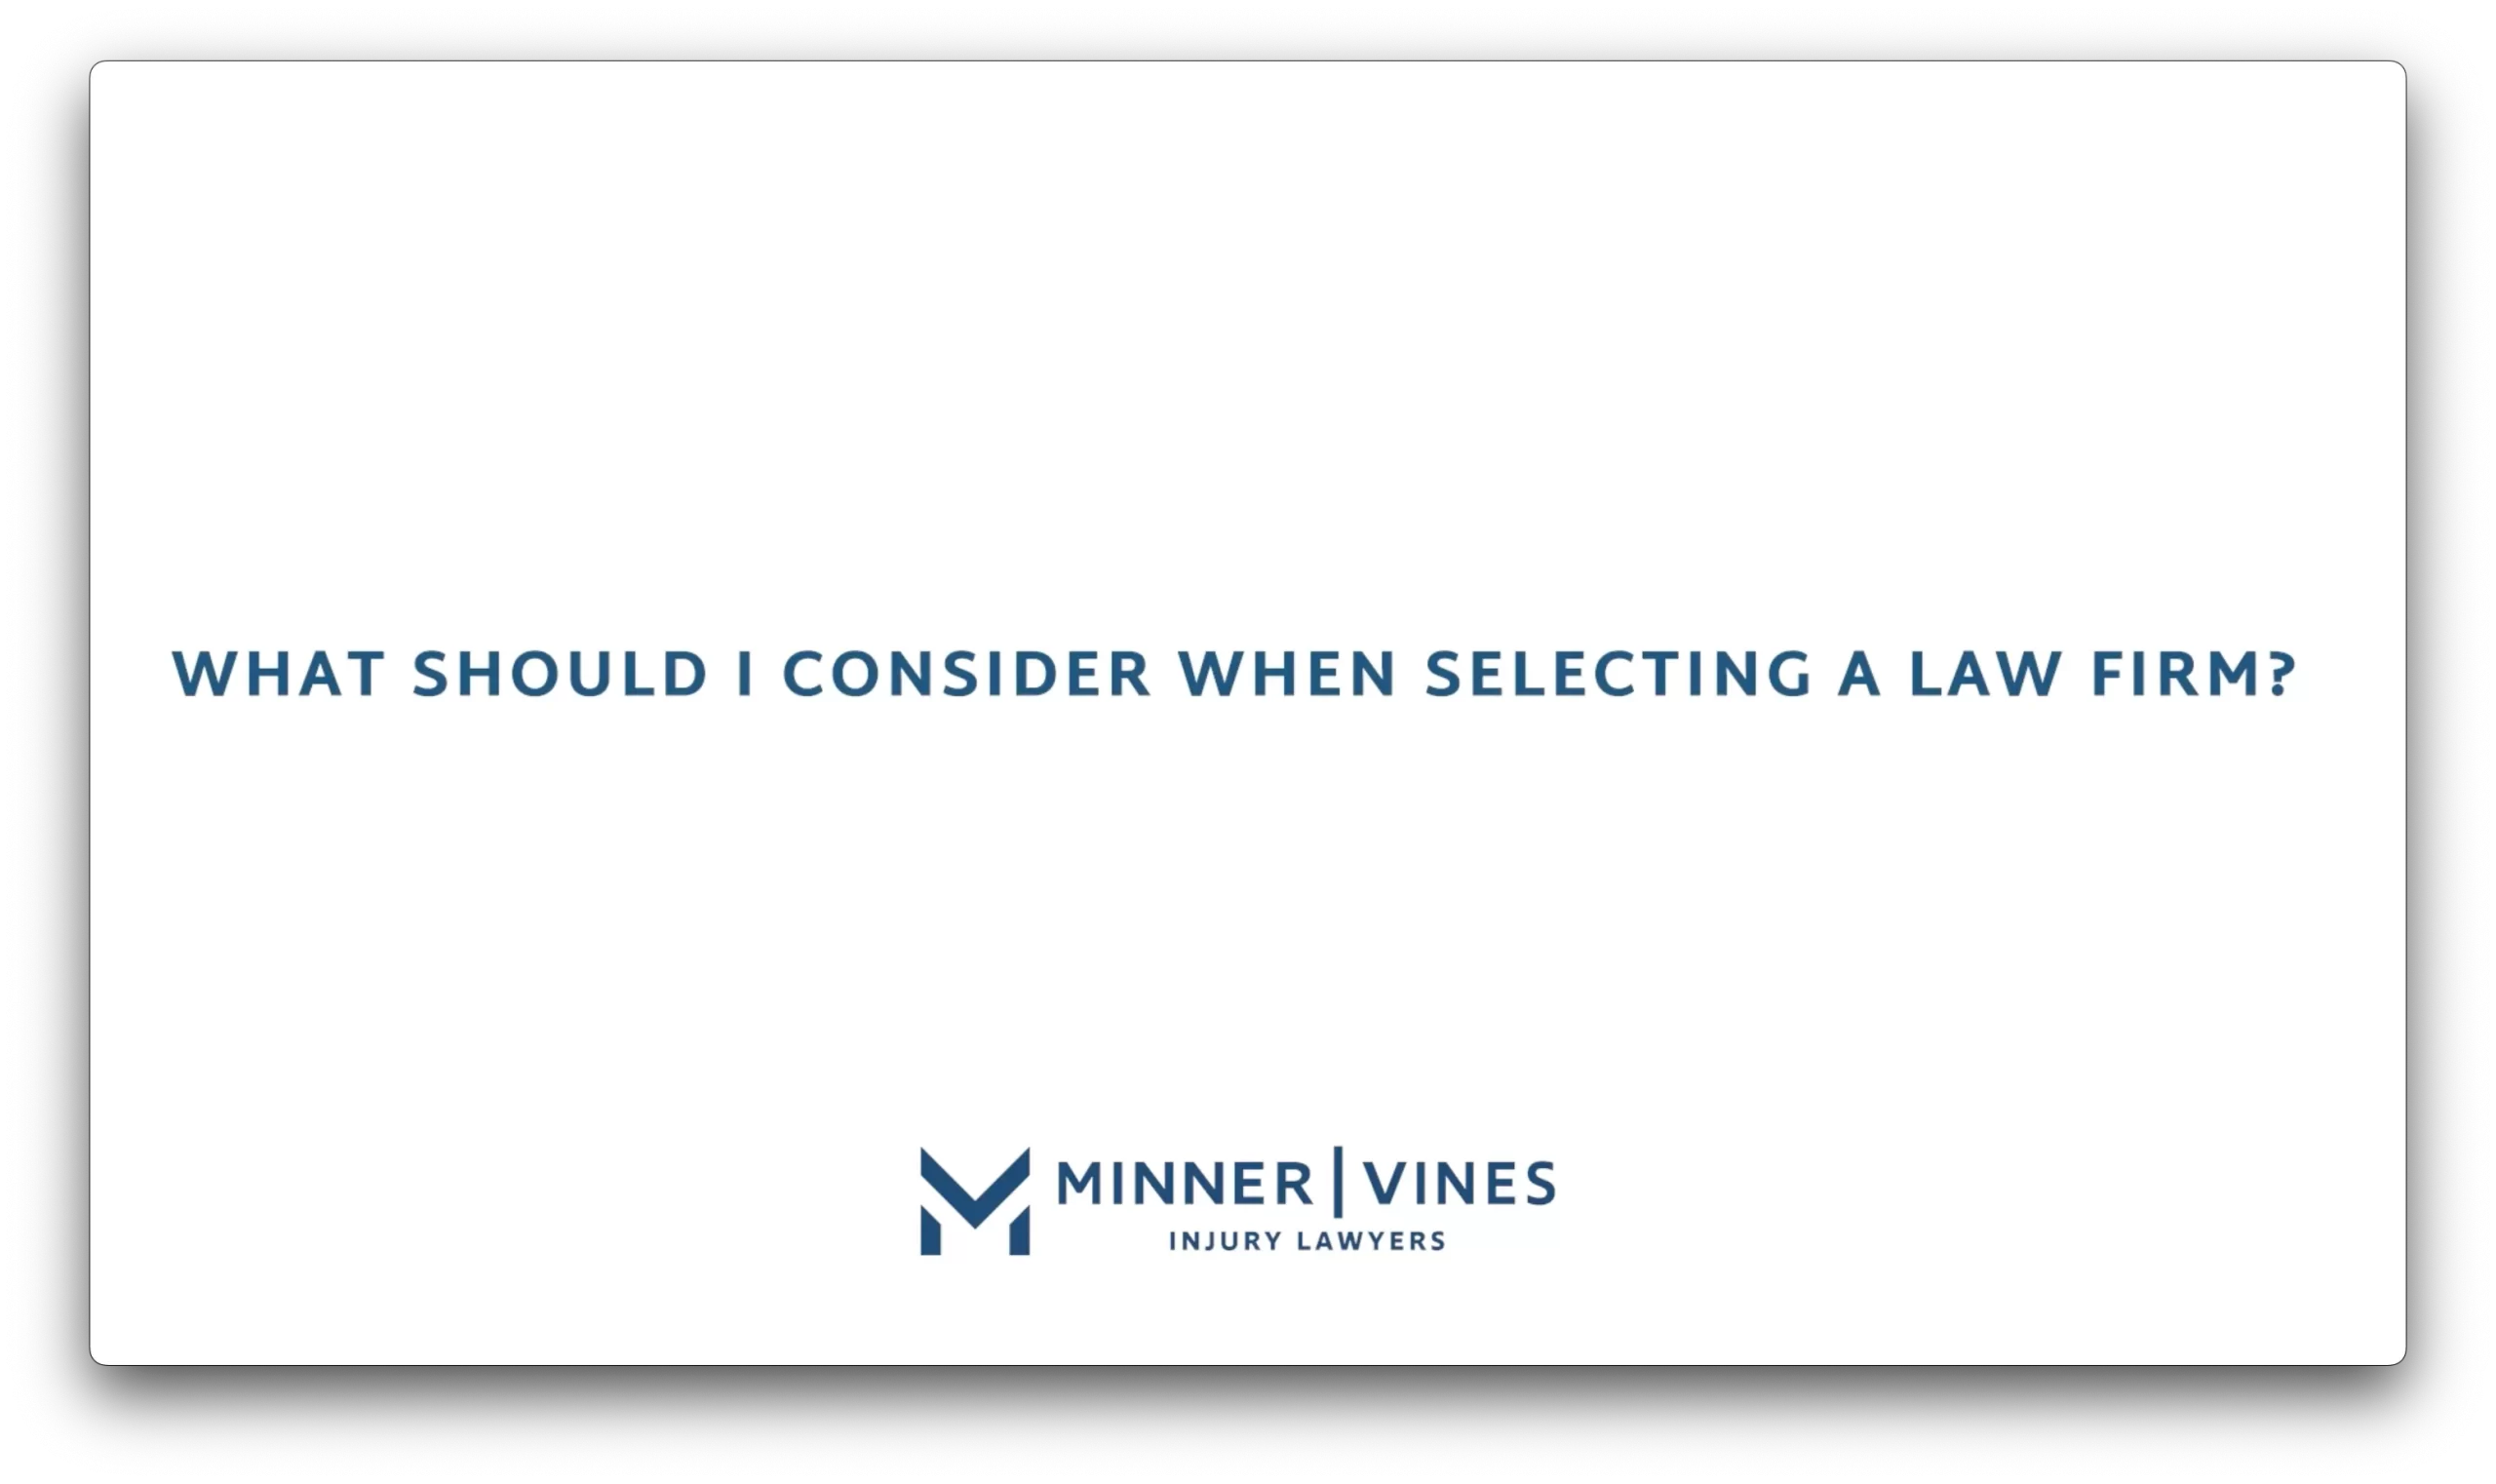 What should I consider when selecting a law firm?